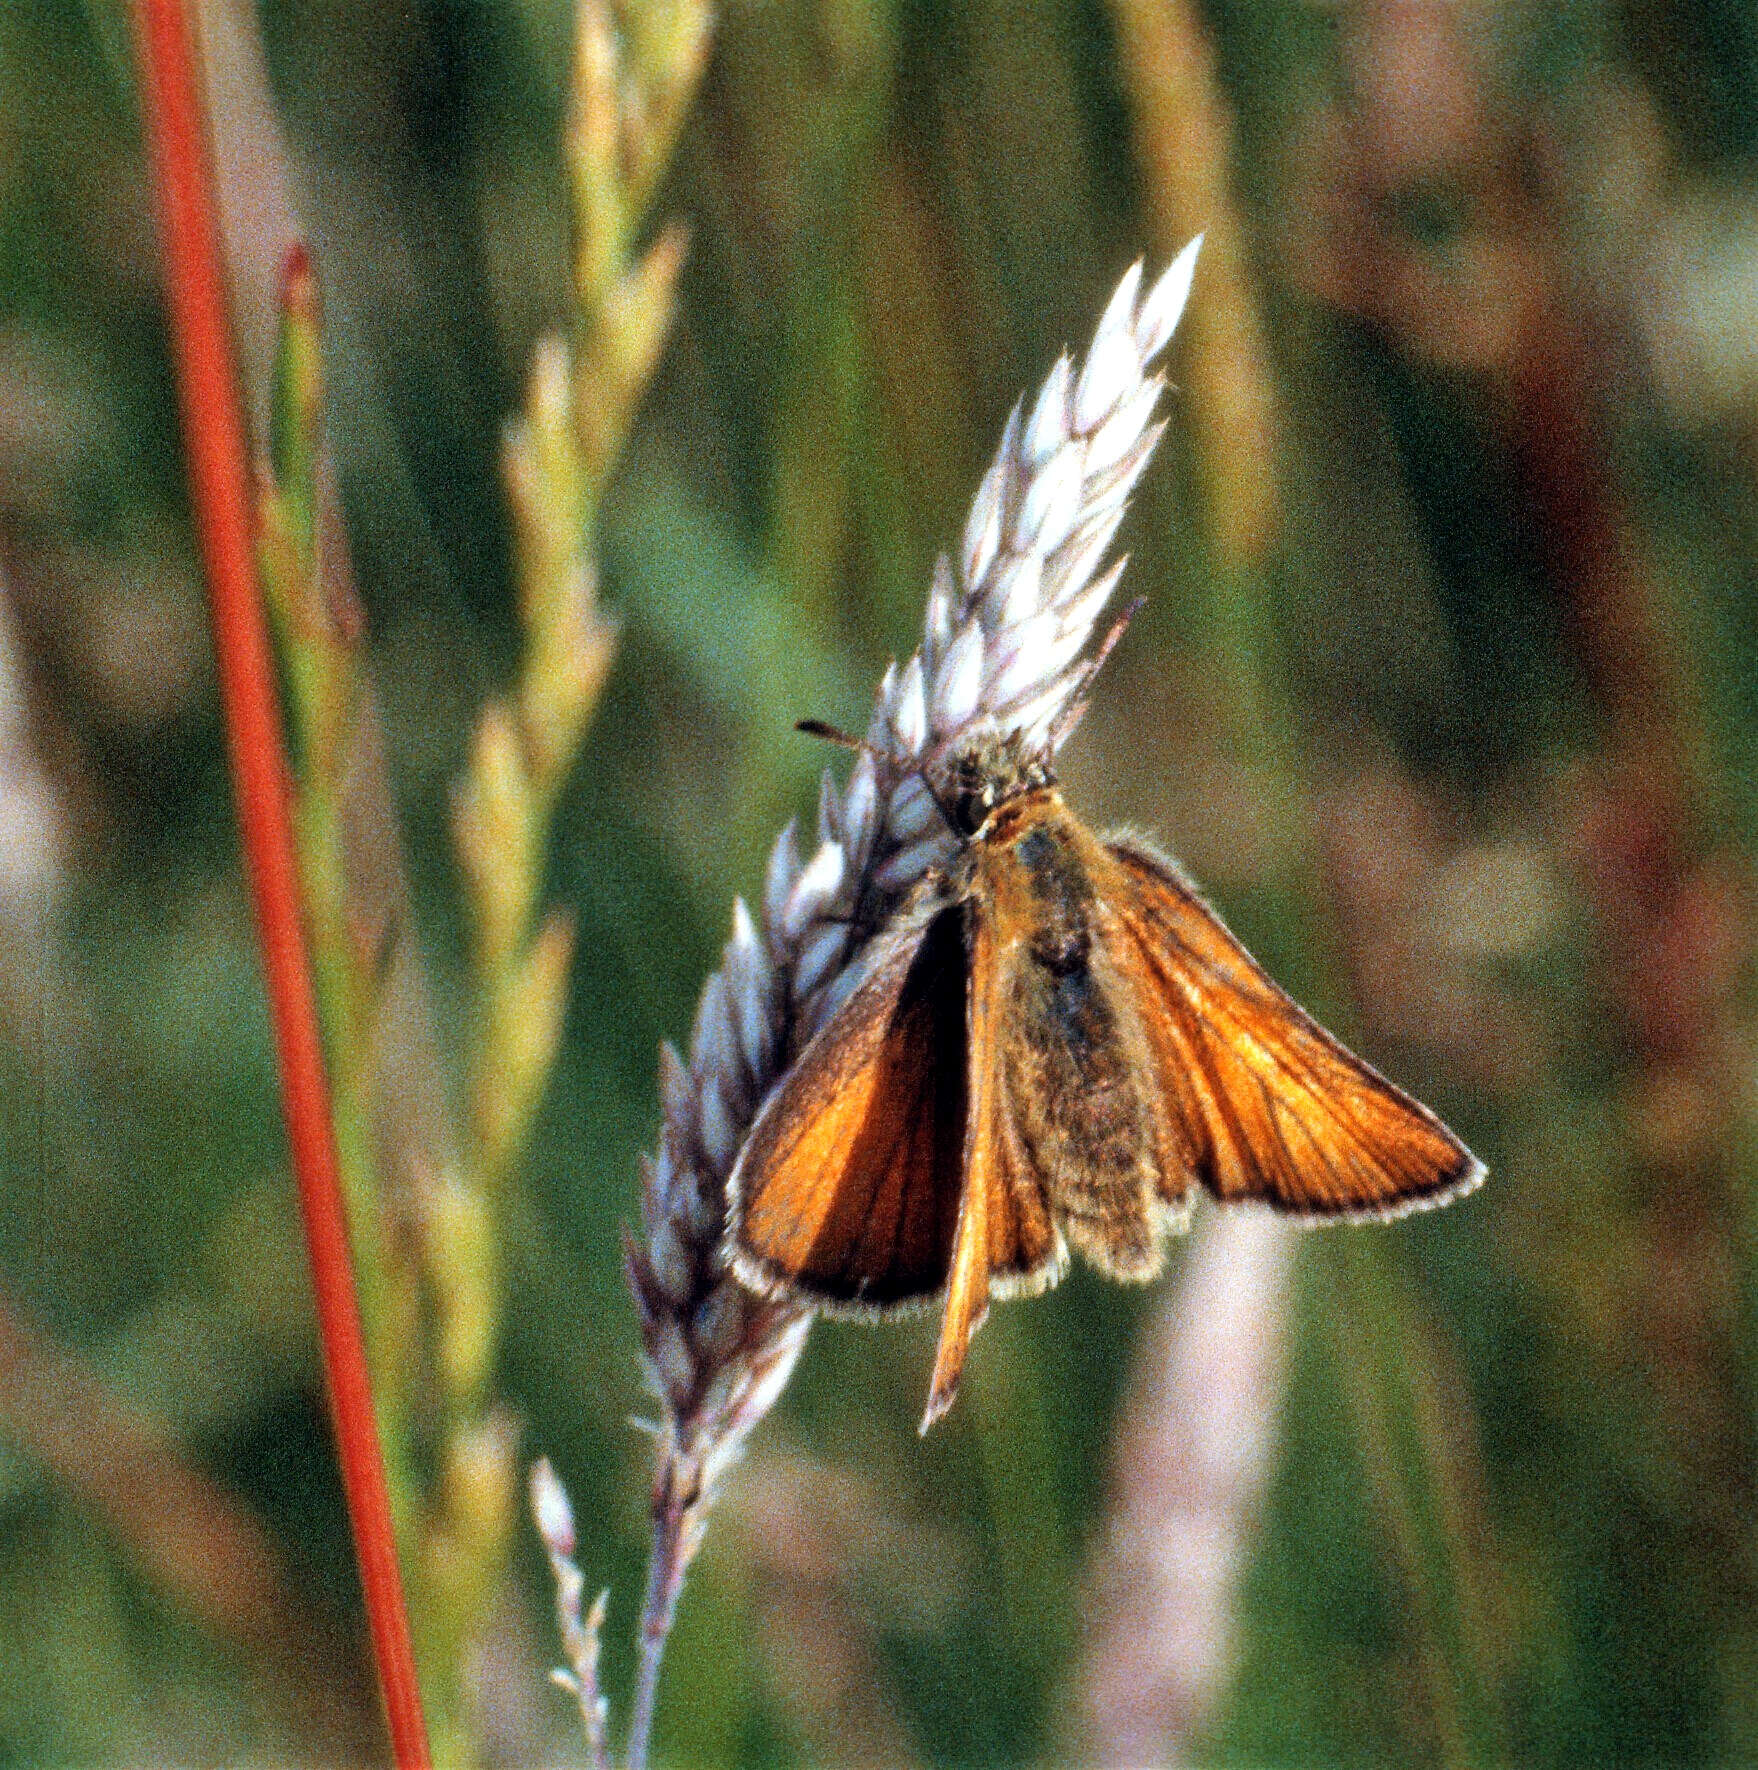 To this day the Small Skipper remains a rare sighting, despite its foodplant  Yorkshire Fog grass being plentiful. A mystery.